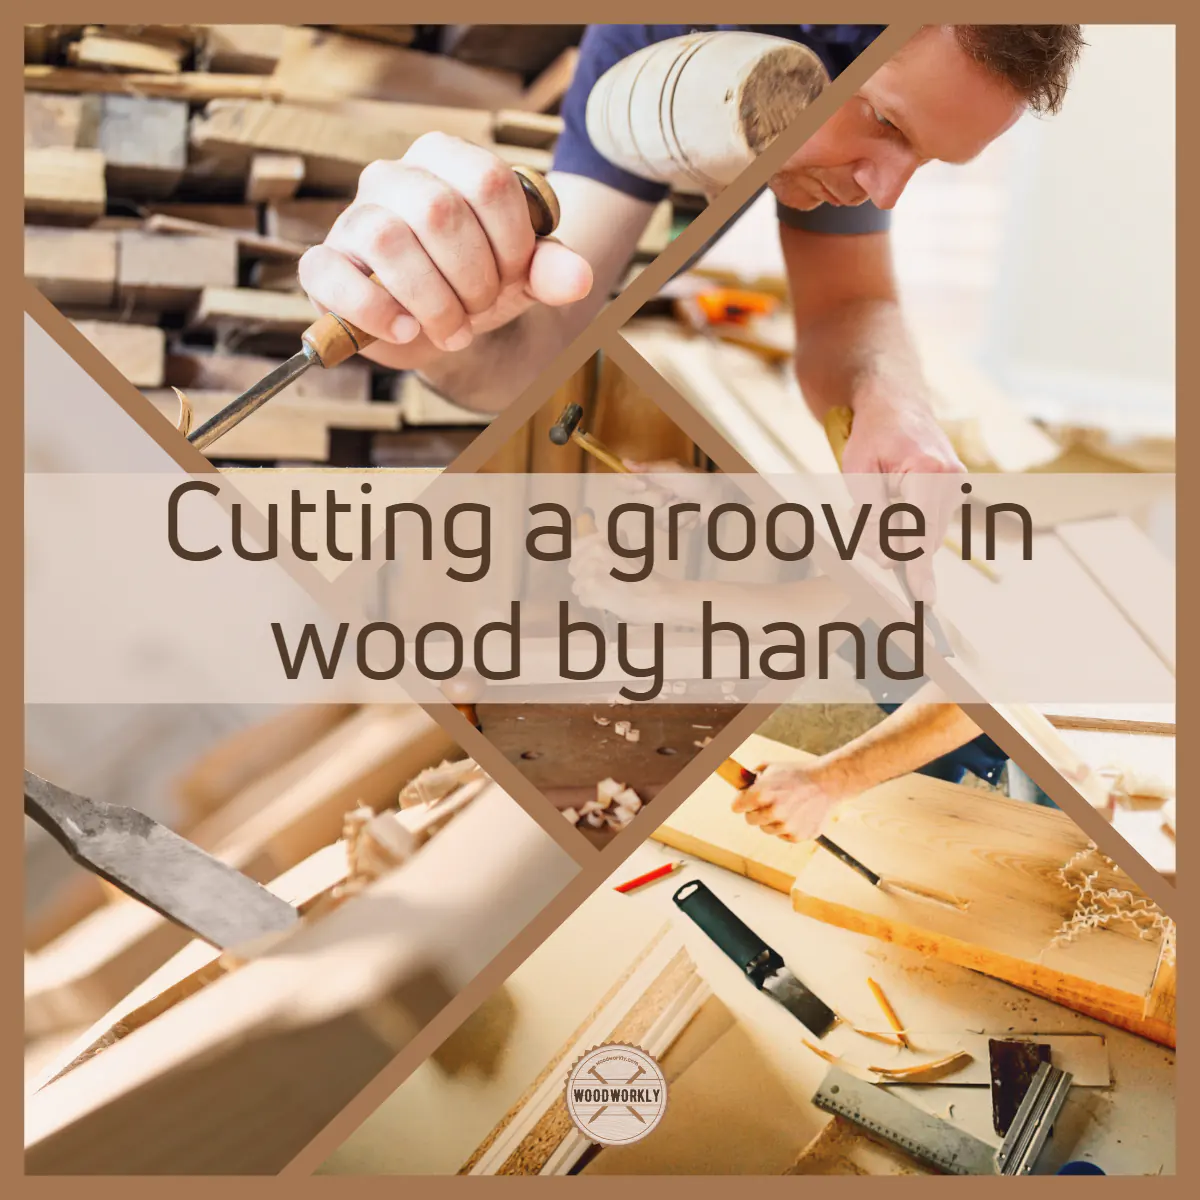 Cutting a groove in wood by hand